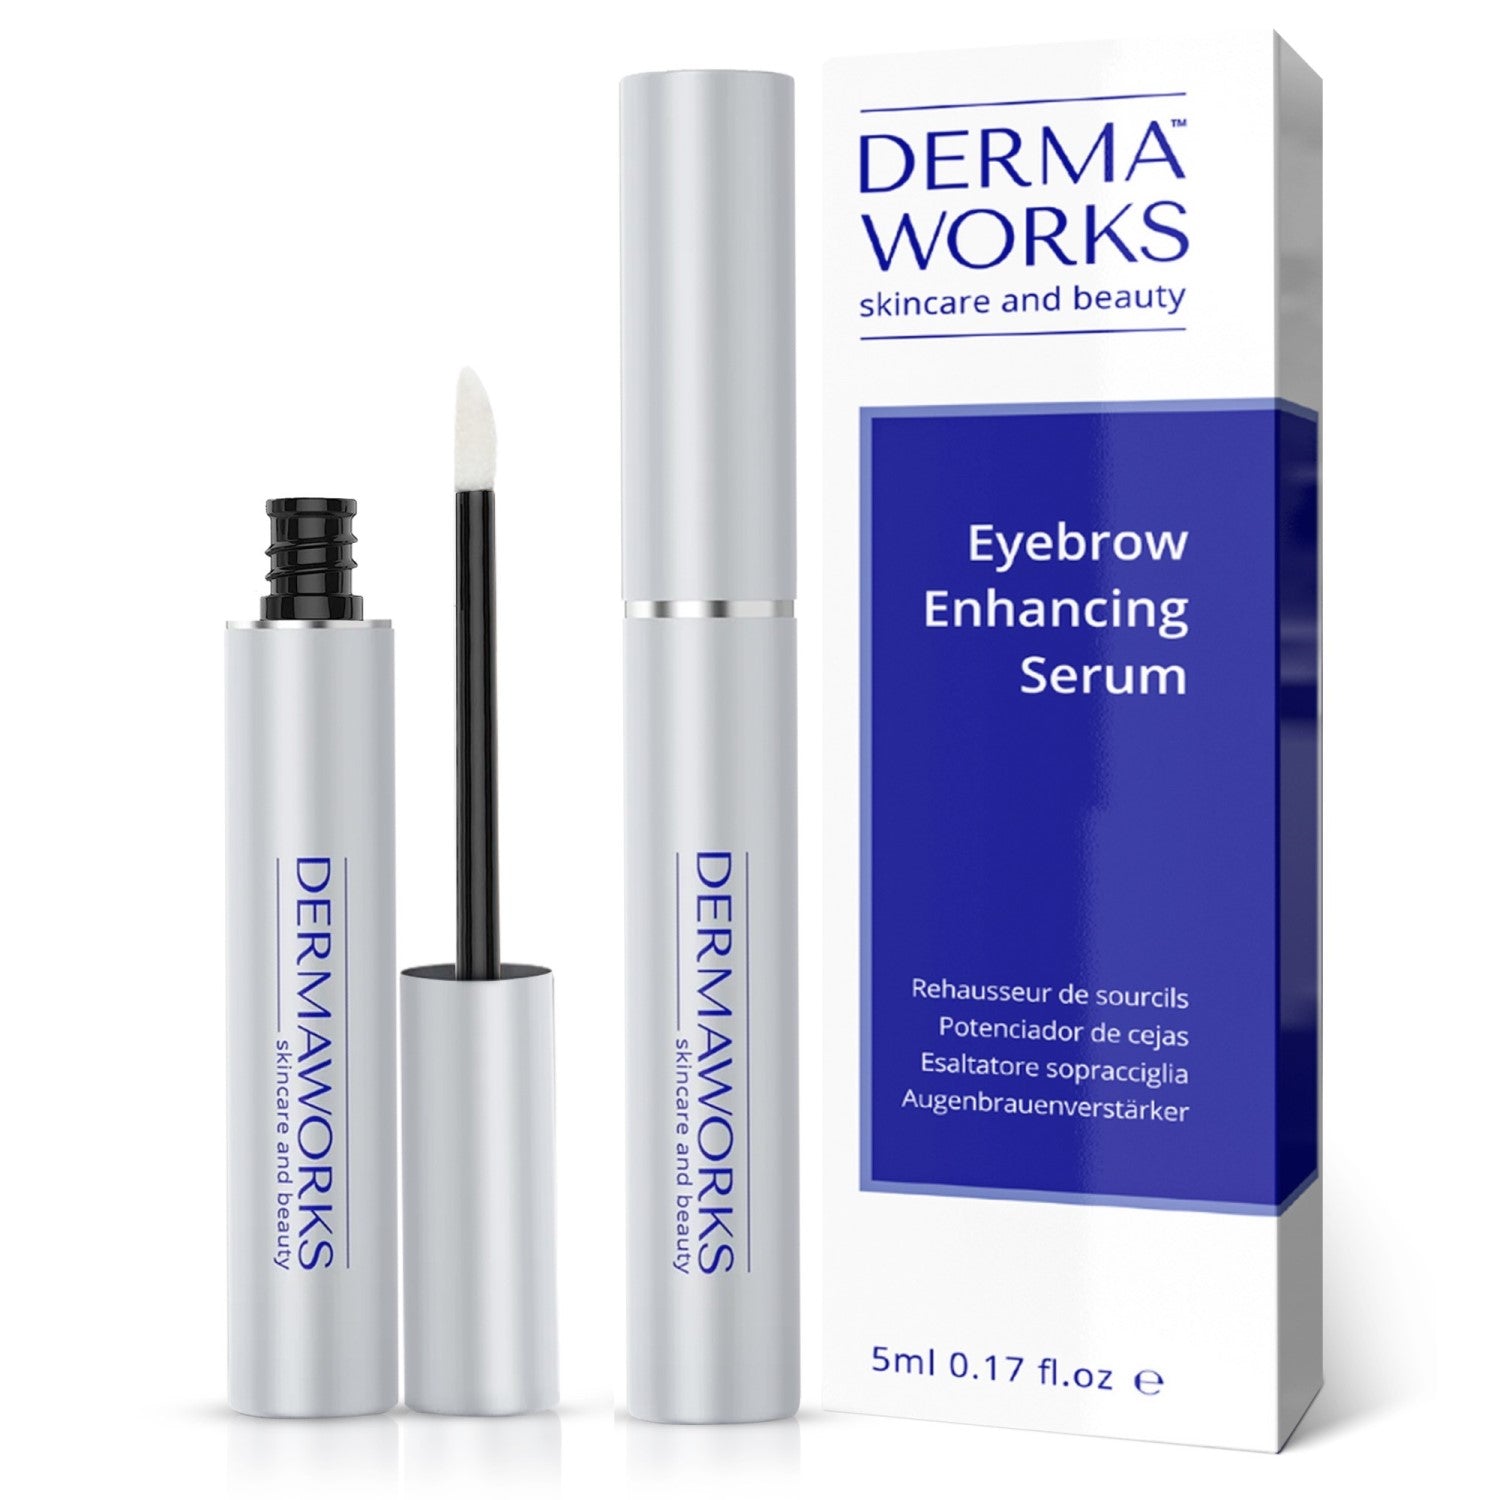 Dermaworks UK brow growth serum helps you to regrow overplucked eyebrows, giving brows a thicker, fuller shape.